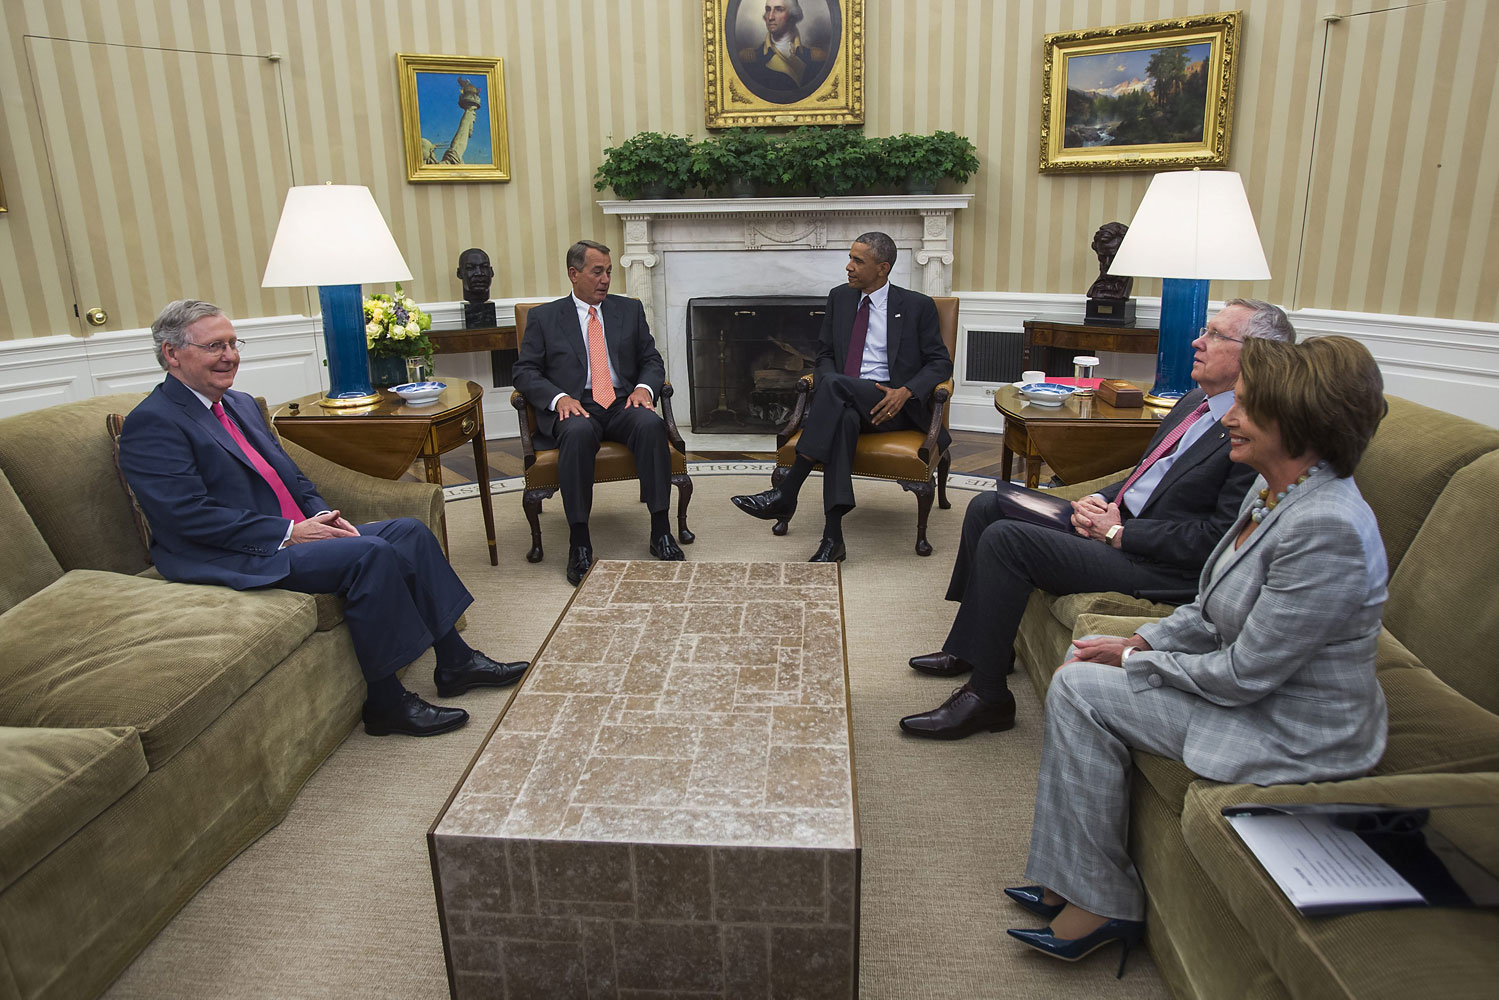 Obama Meets With Congress About ISIS Threat at White House